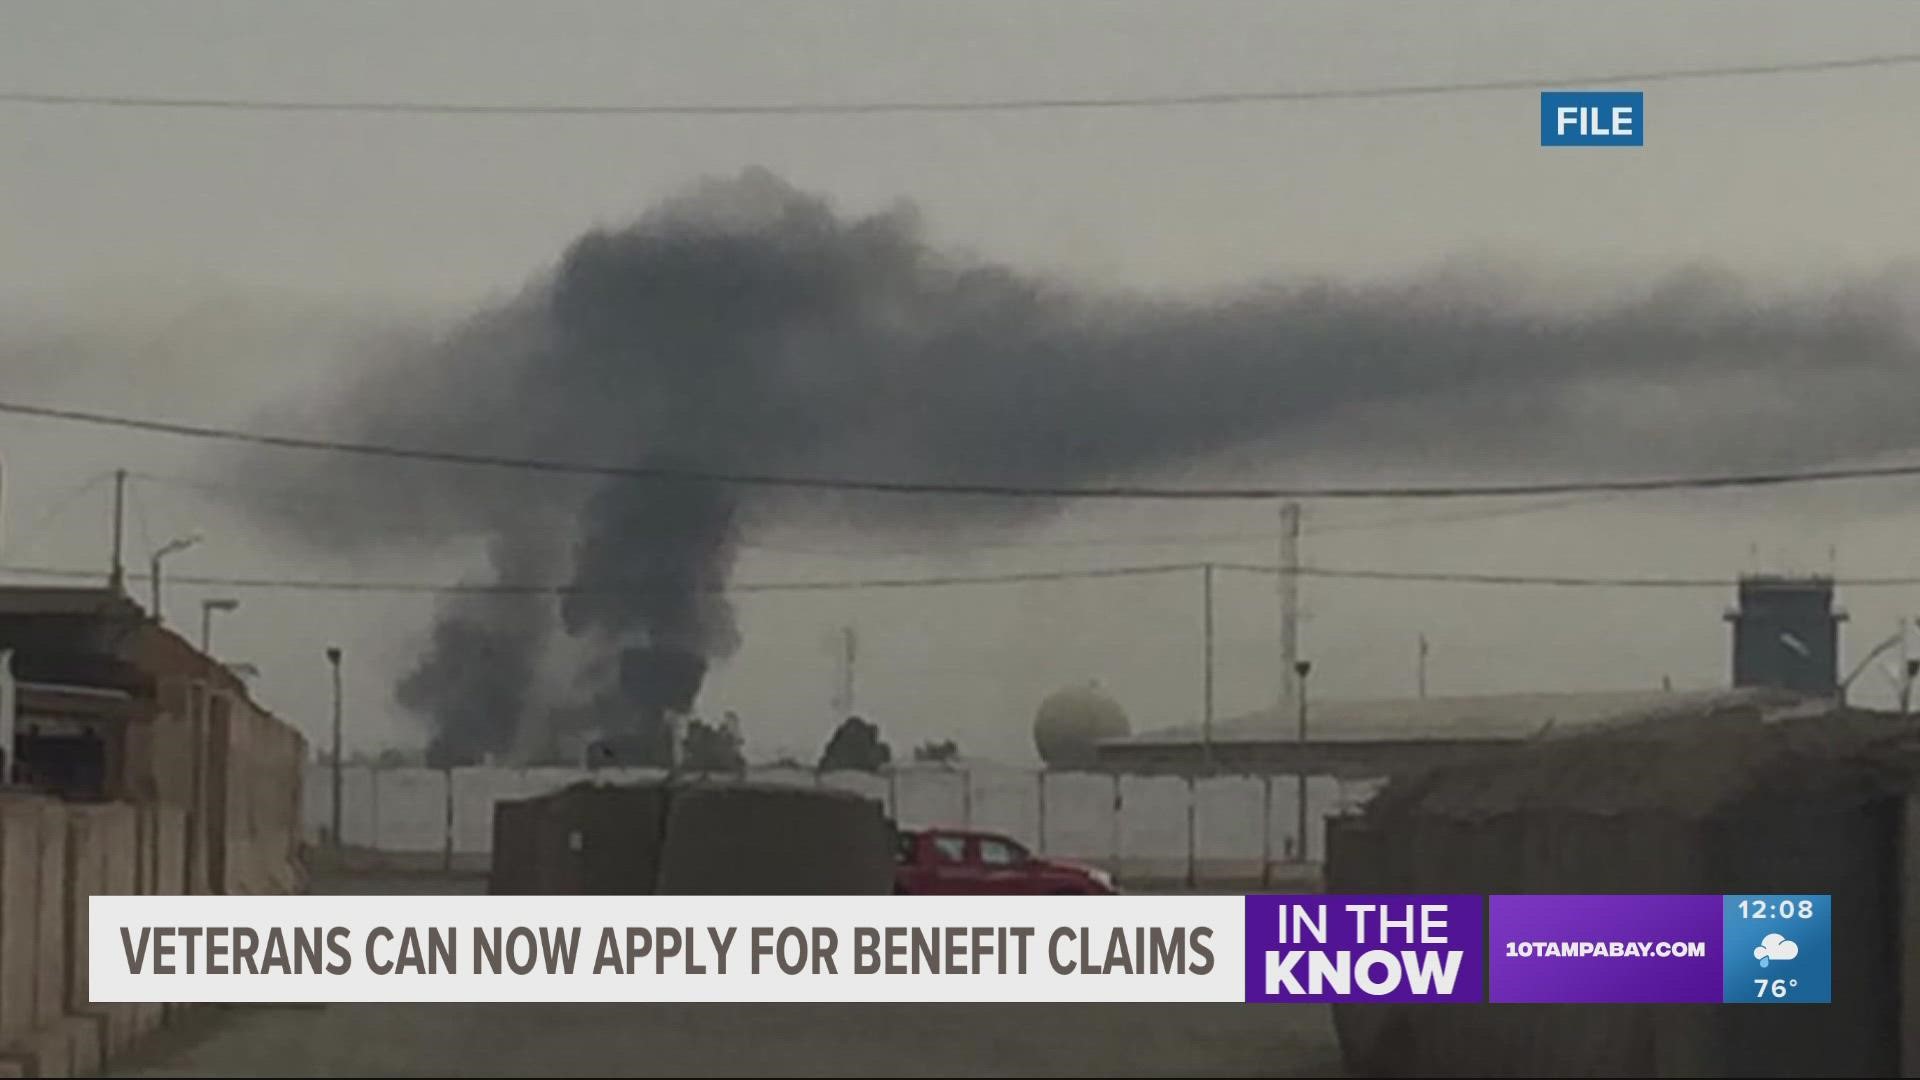 Veterans who served in the Vietnam war, the gulf war, or the post-9/11 wars can now apply for benefits and care for illnesses related to exposure to toxic burn pits.